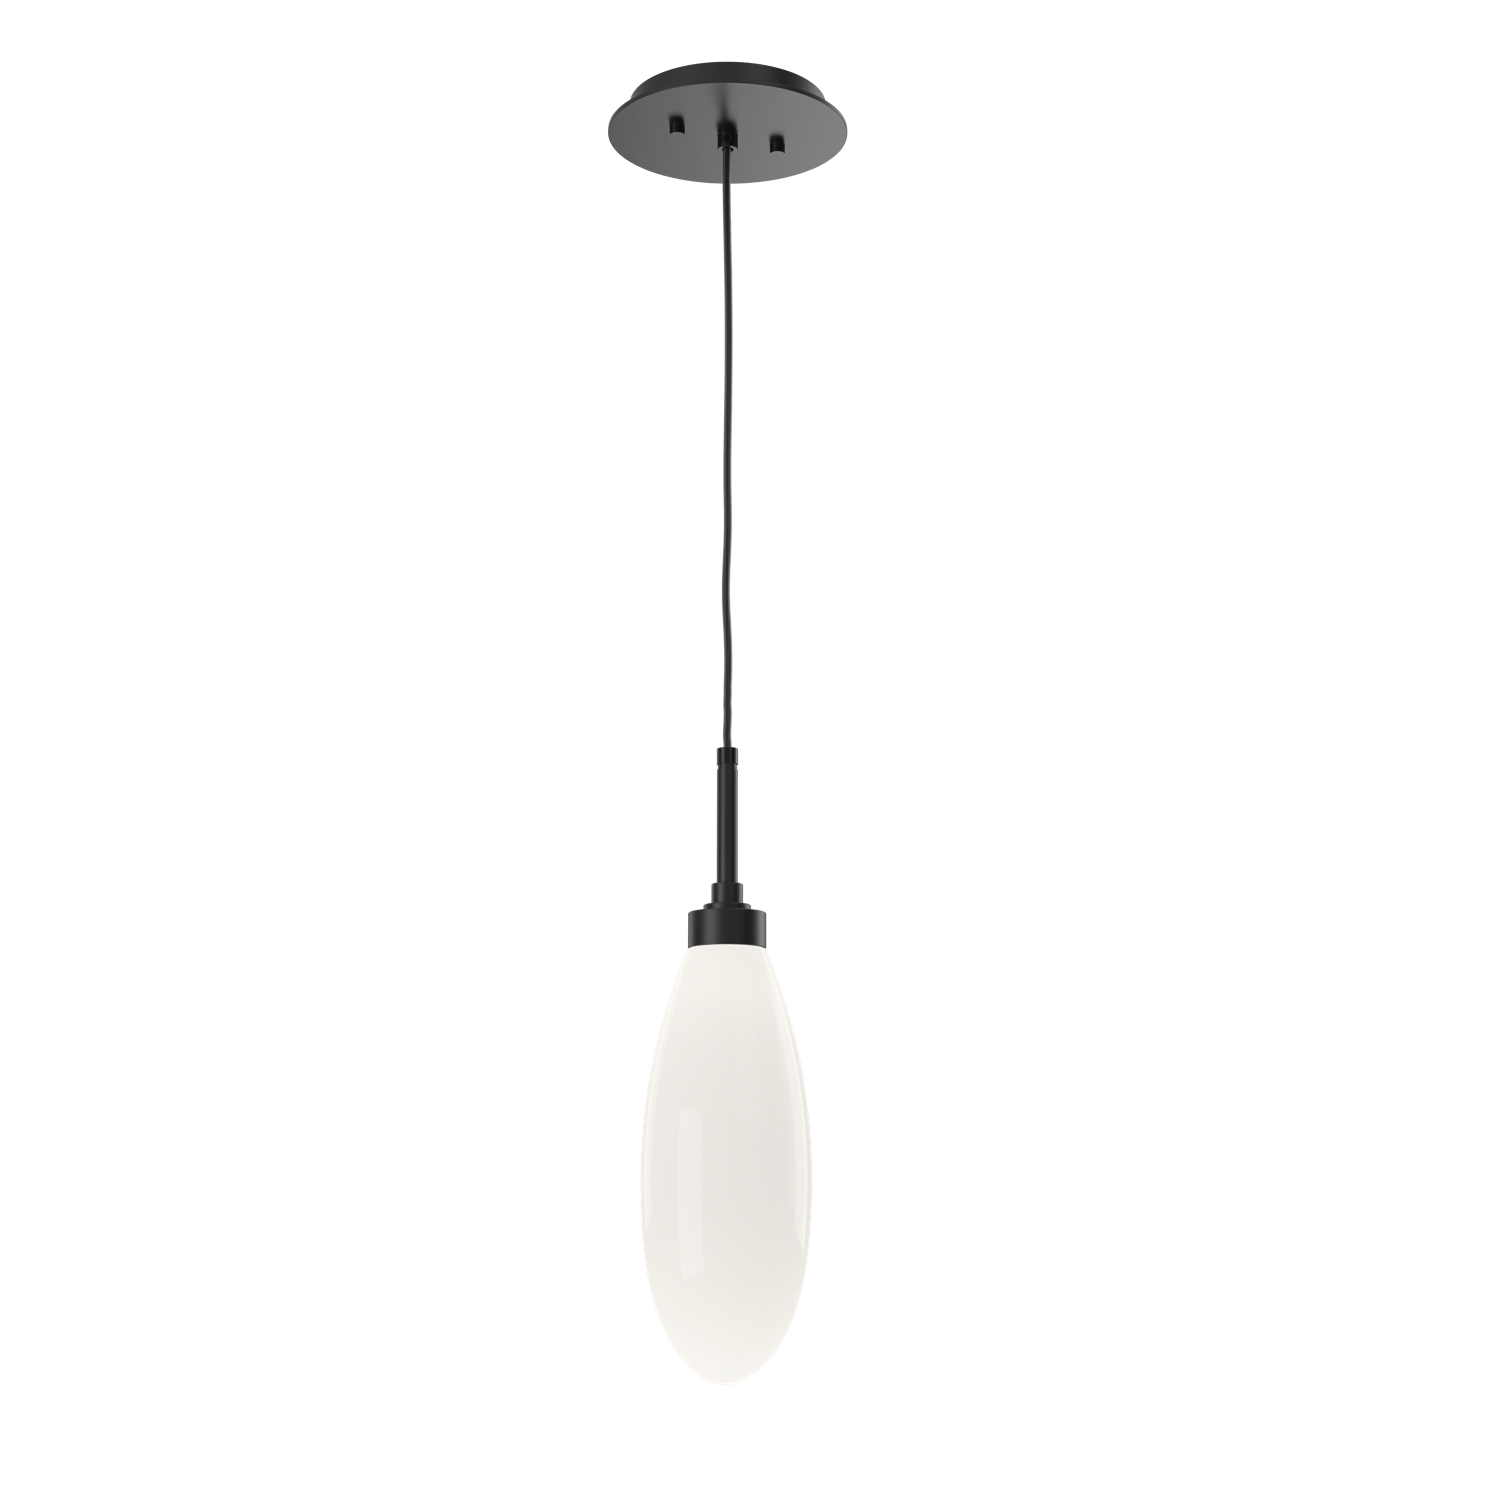 LAB0071-15-MB-WL-LL-Hammerton-Studio-Fiori-pendant-light-with-matte-black-finish-and-opal-white-glass-shades-and-LED-lamping